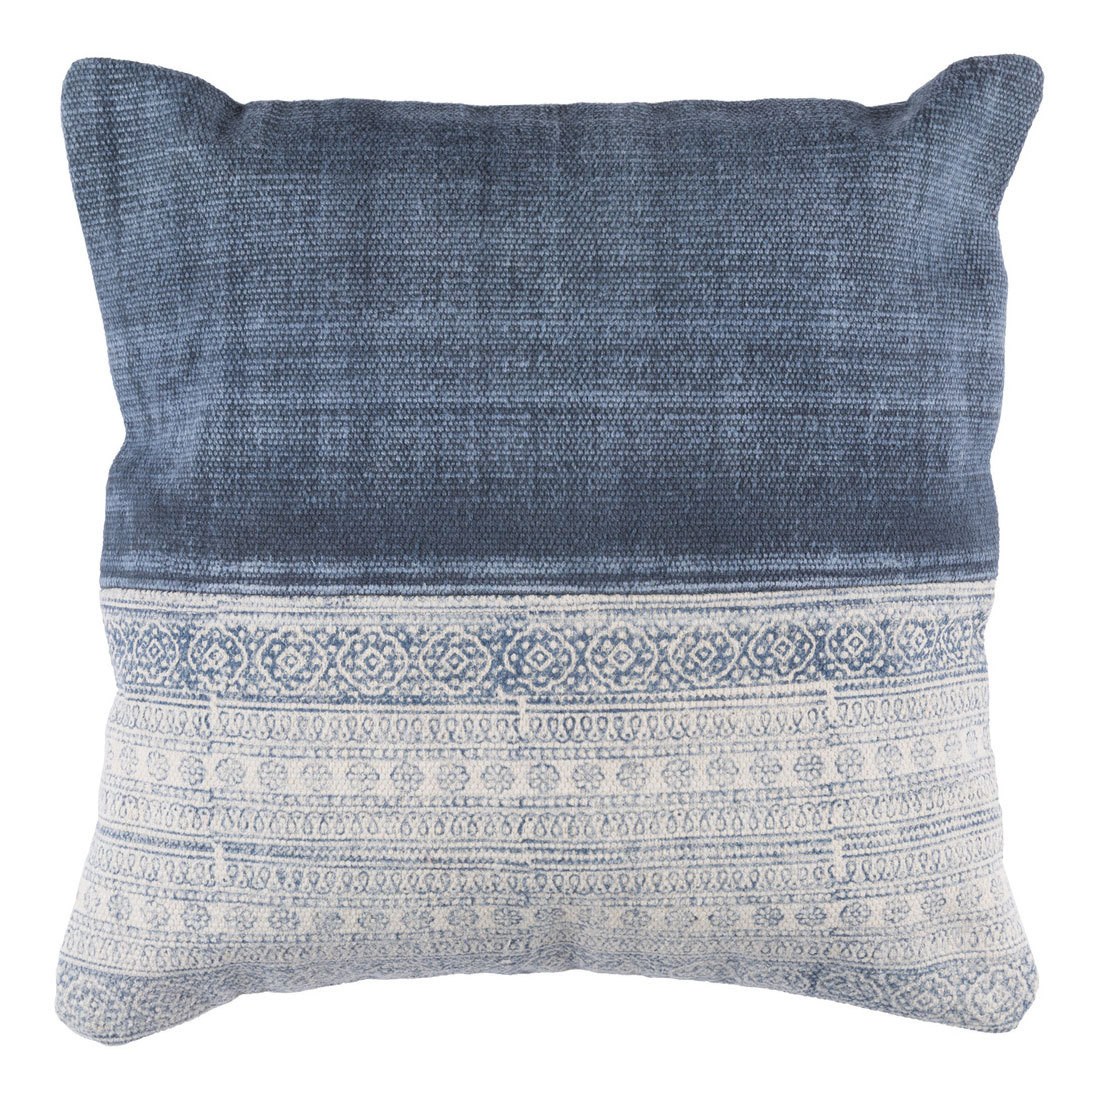 Hmong Zoov Pillow - LL-004
20 x 20 inches
Cotton